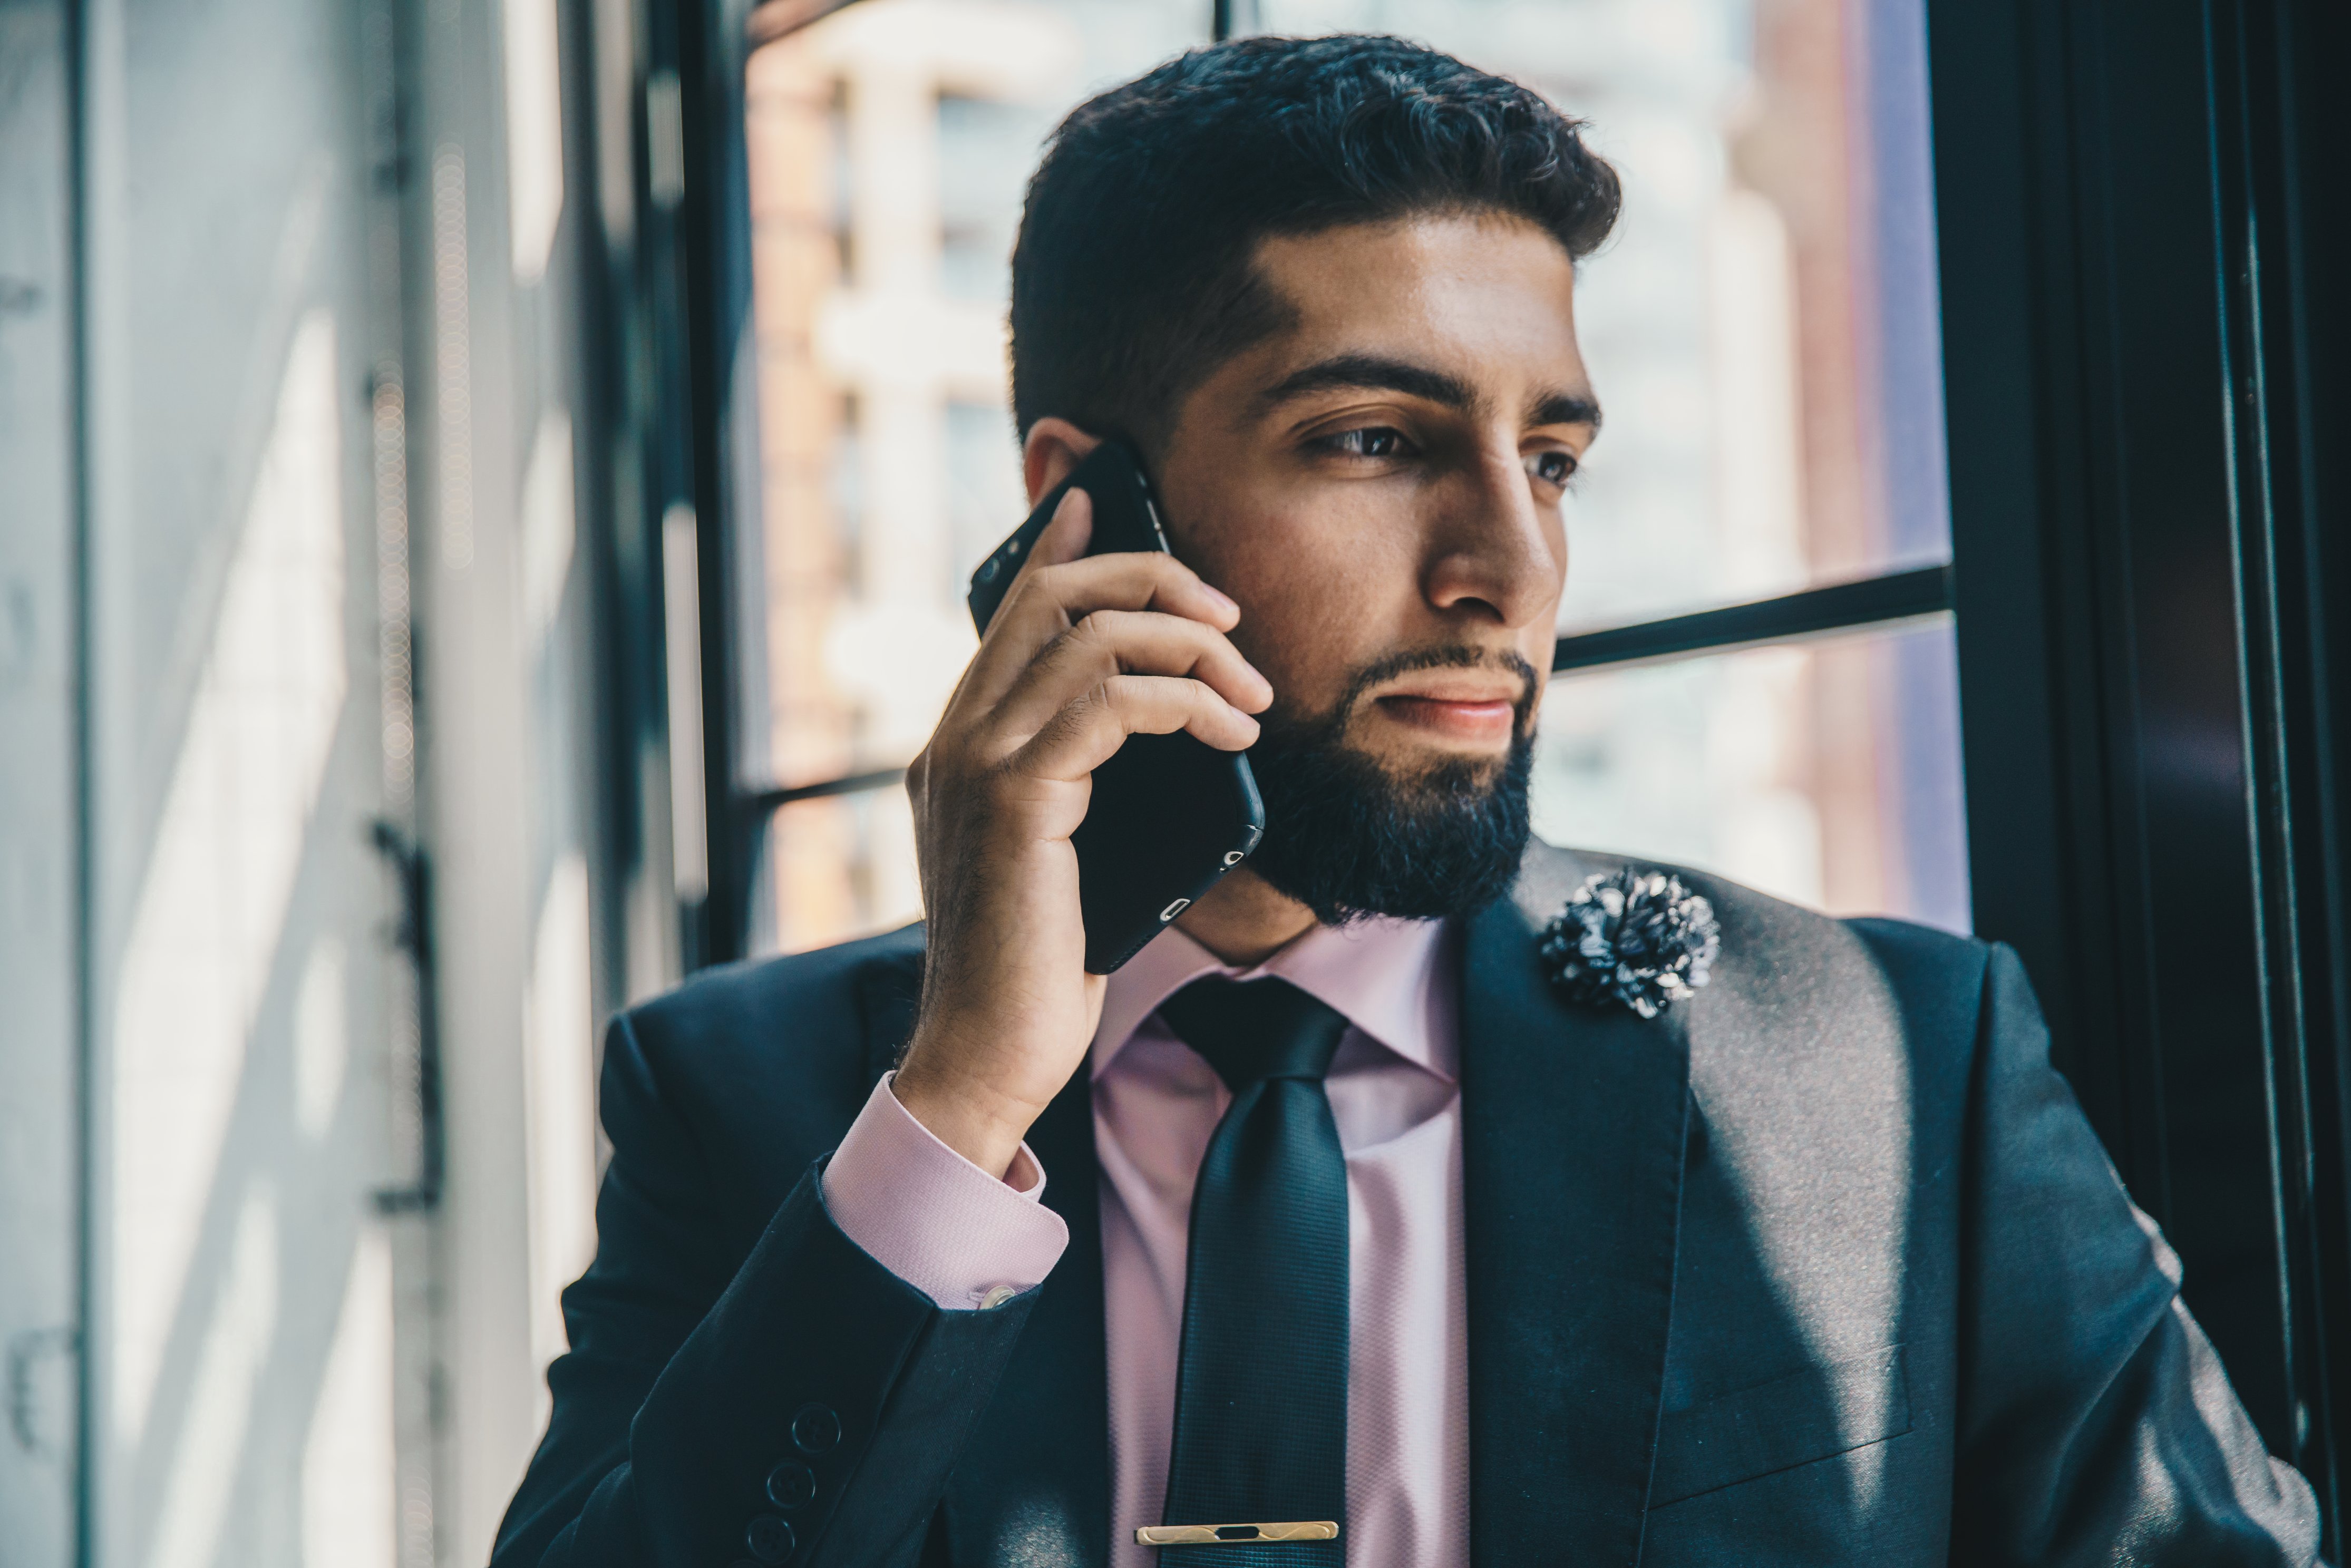 man in suit on phone